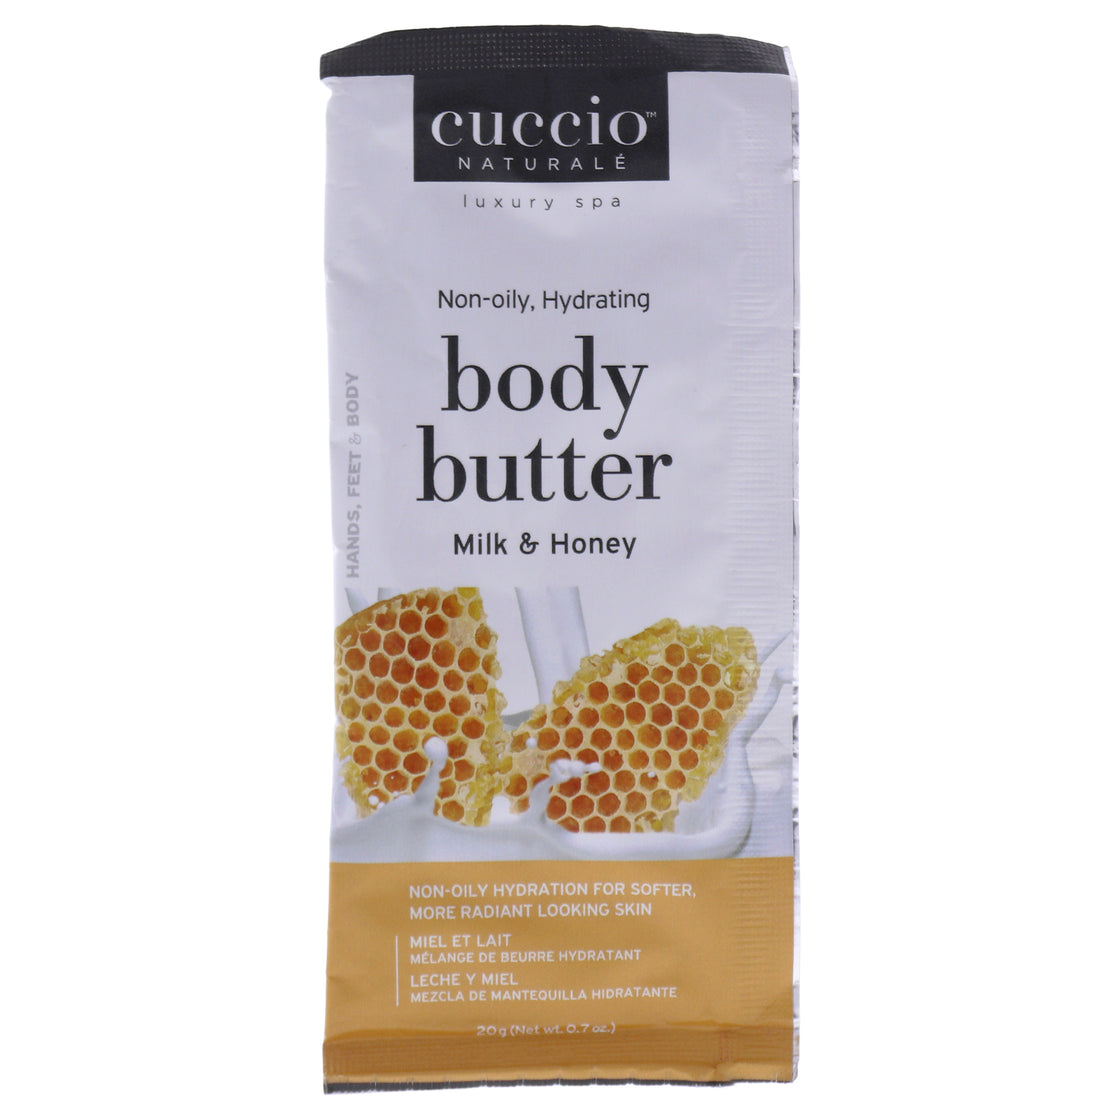 Luxury Spa Non-Oily Hydrating Butter - Milk and Honey by Cuccio Naturale for Unisex - 0.7 oz Body Butter